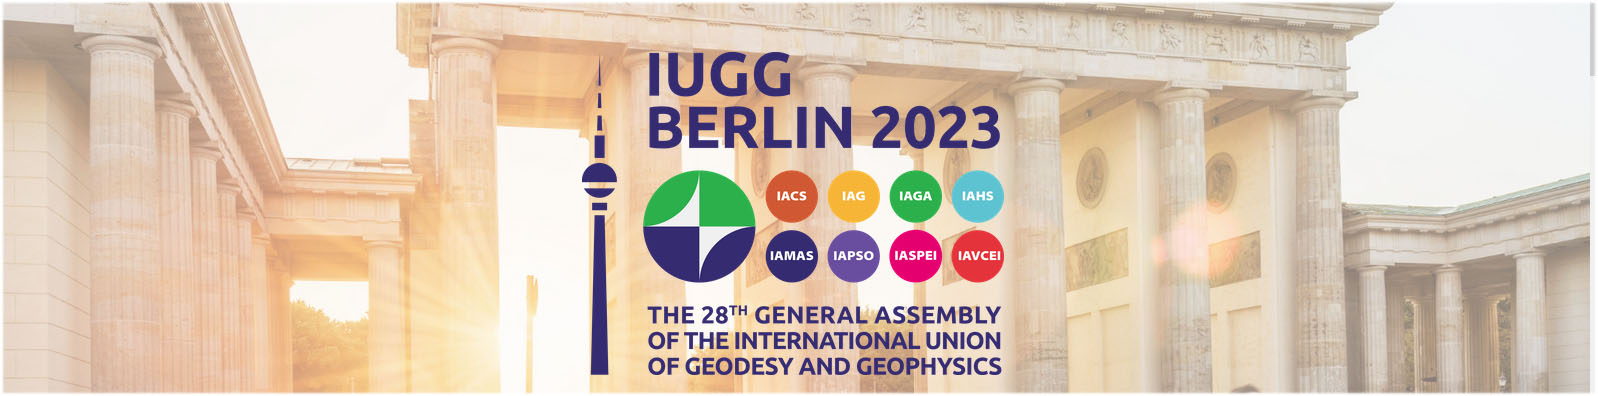 IUGG Berlin 2023 — 28th IUGG General Assembly